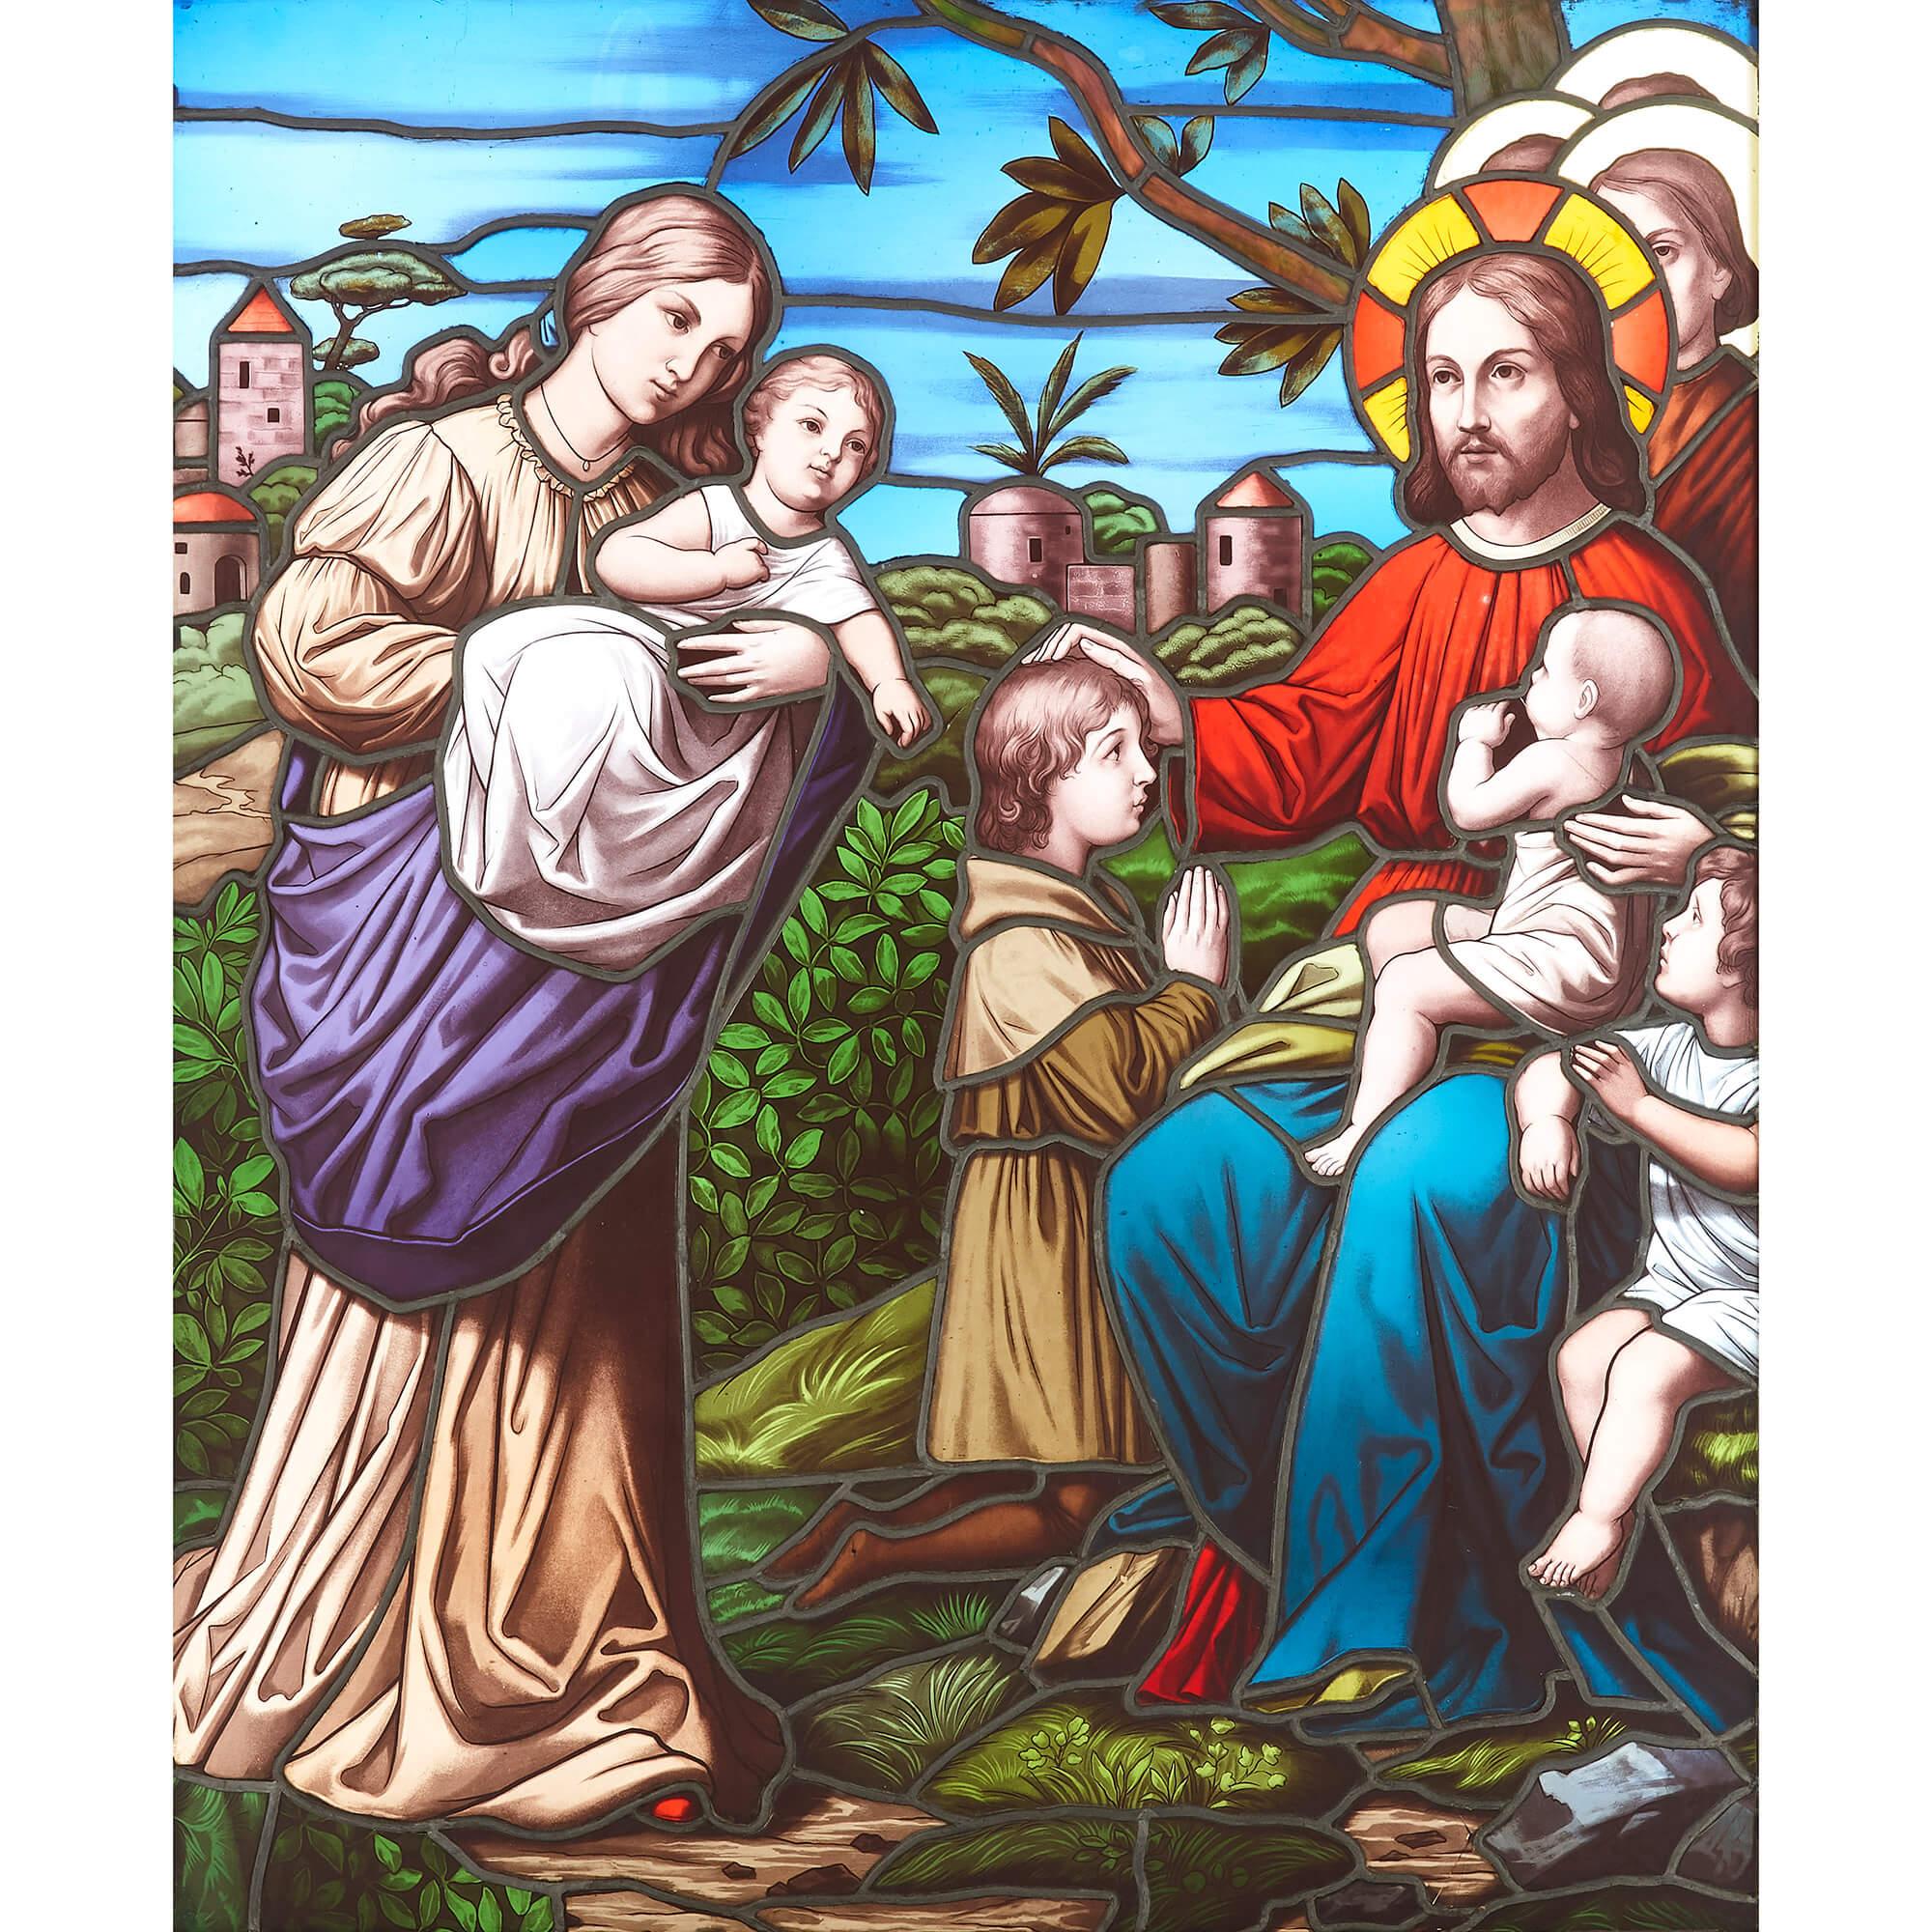 Christian stained-glass window of Christ blessing children
Continental, early 20th Century
Measures: Frame: Height 112cm, width 95cm, depth 12cm
Window: Height 110cm, width 93.5cm, depth 0.5cm

The subject for this beautiful stained-glass